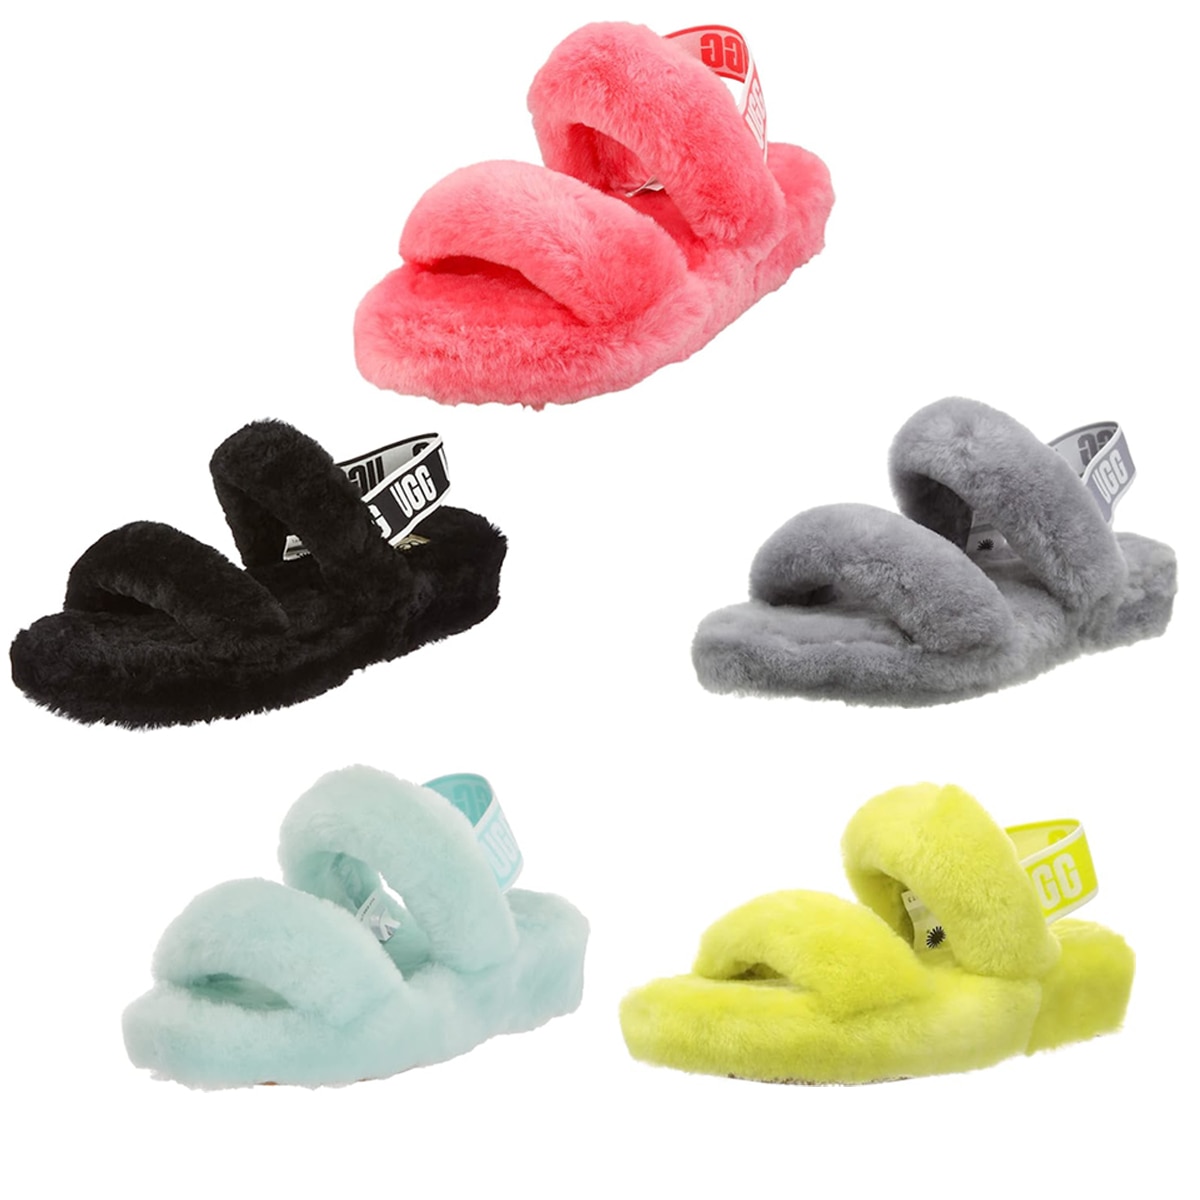 LADIES WOMENS WARM FAUX FUR LINED COMFY HARD SOLE OUTDOOR SLIPPERS SHOES  SIZE | eBay